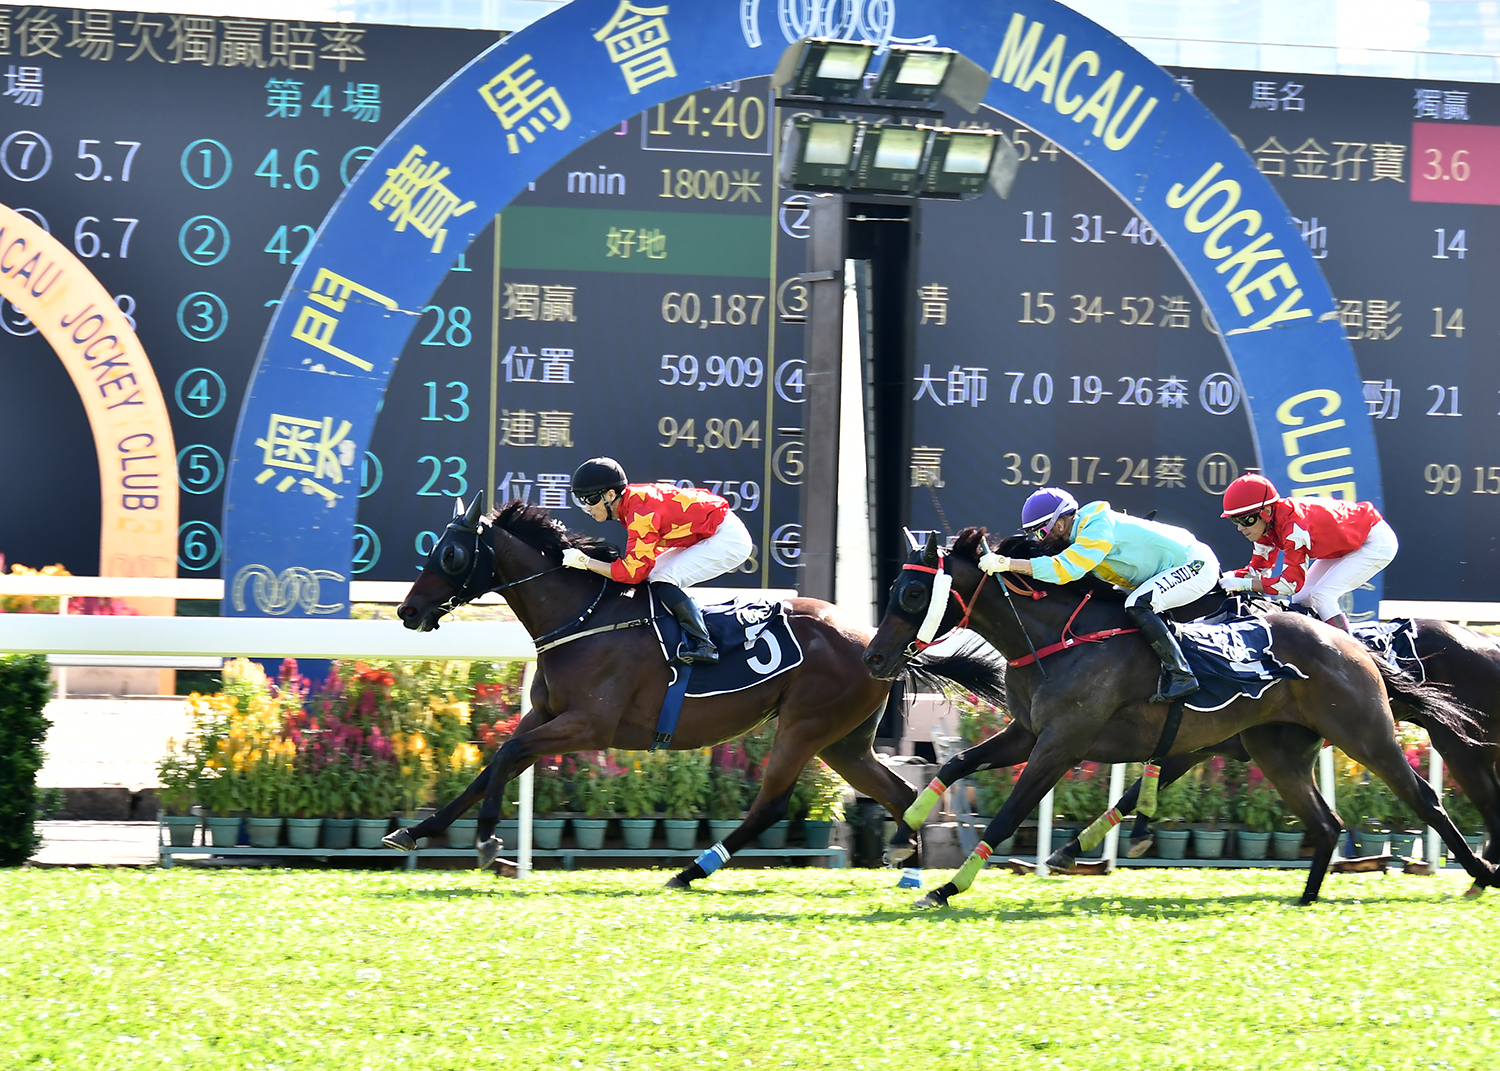 The government is ending its contract with the Macau Jockey Club